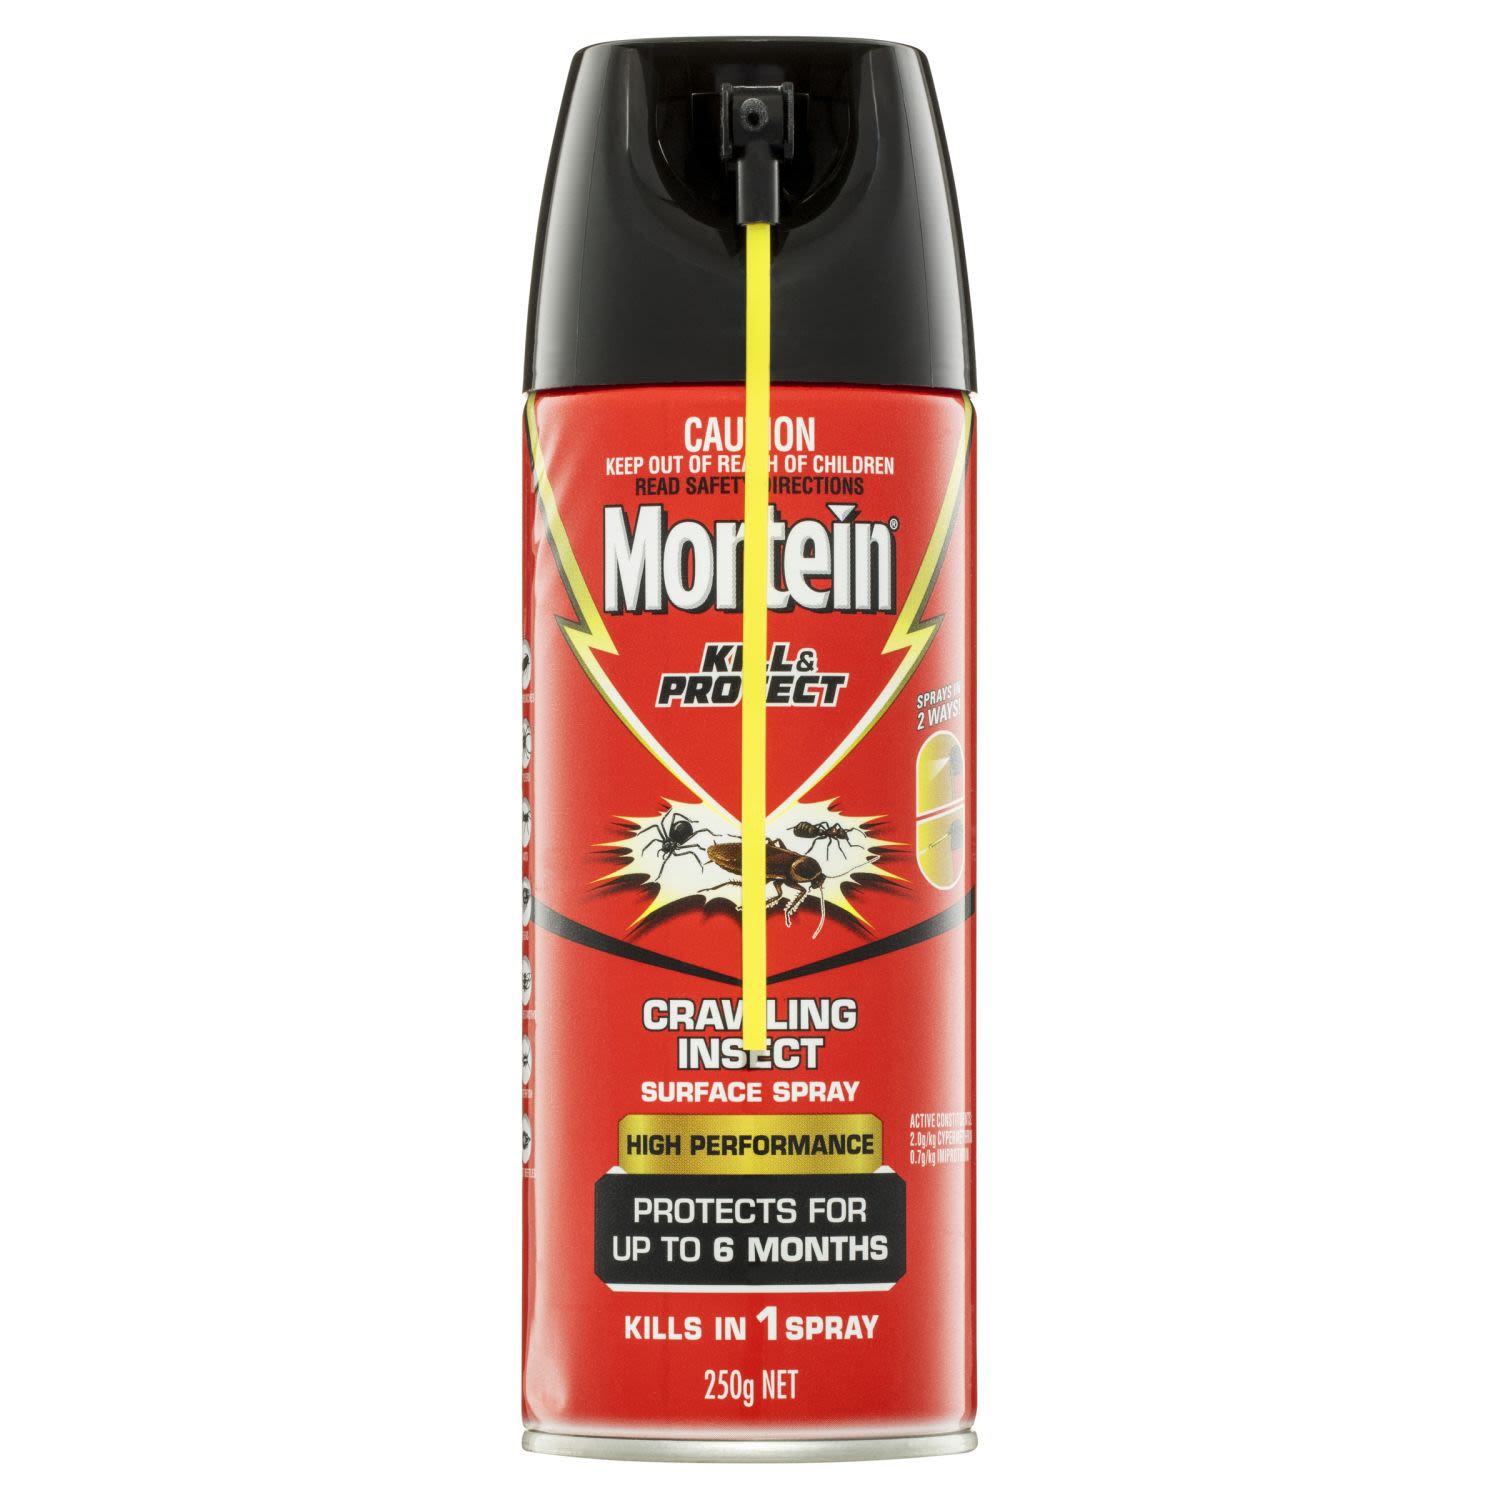 Mortein Kill & Protect Crawling Insect High Performance, 250 Gram